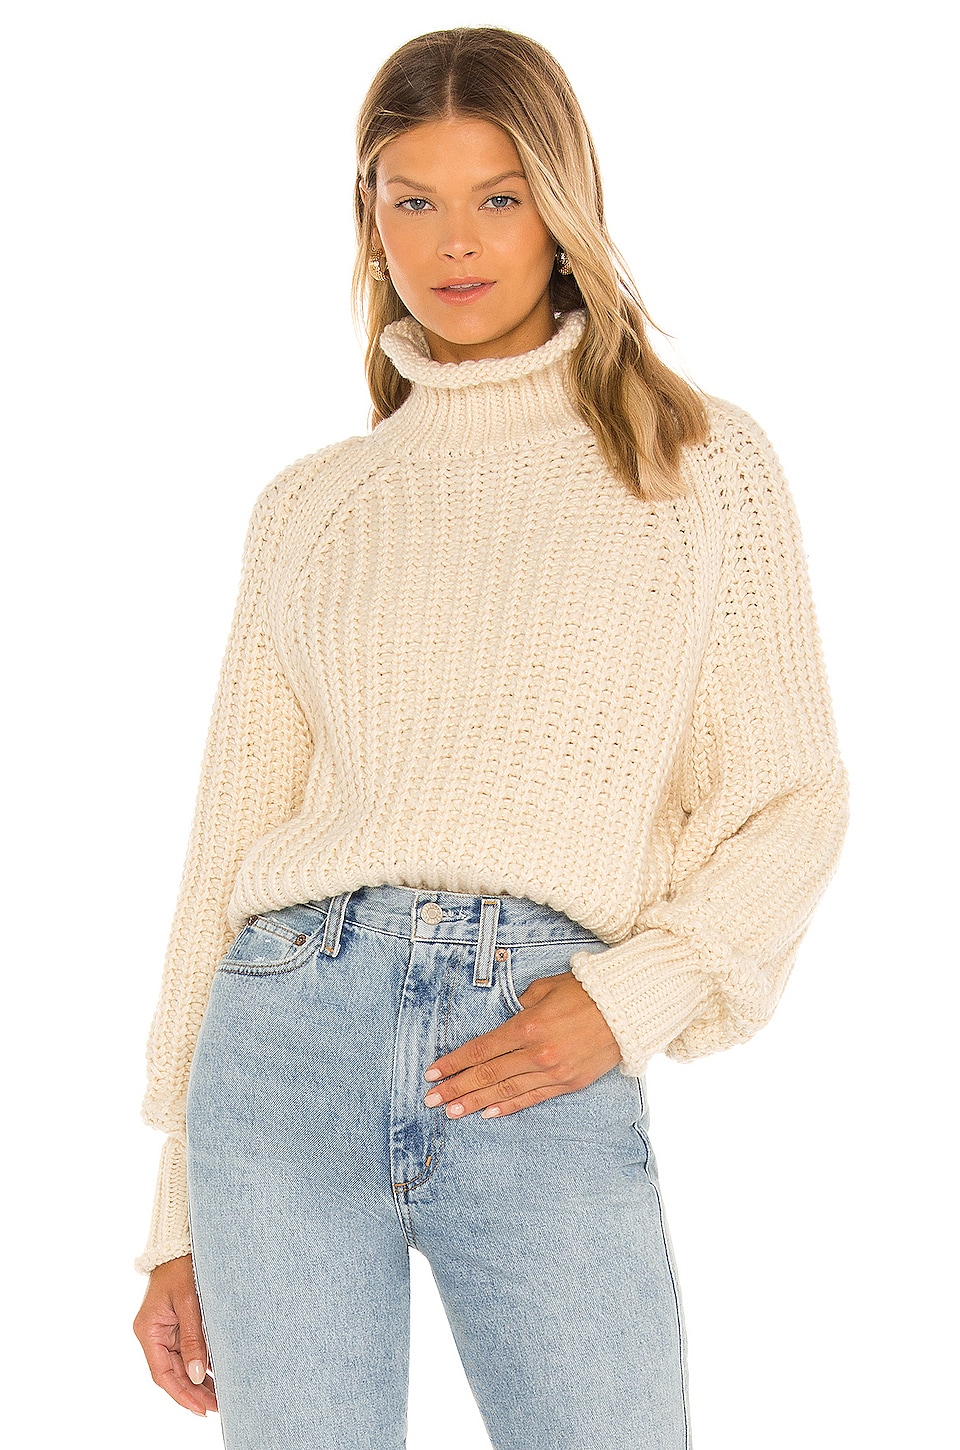 LBLC The Label Jules Sweater in Creme